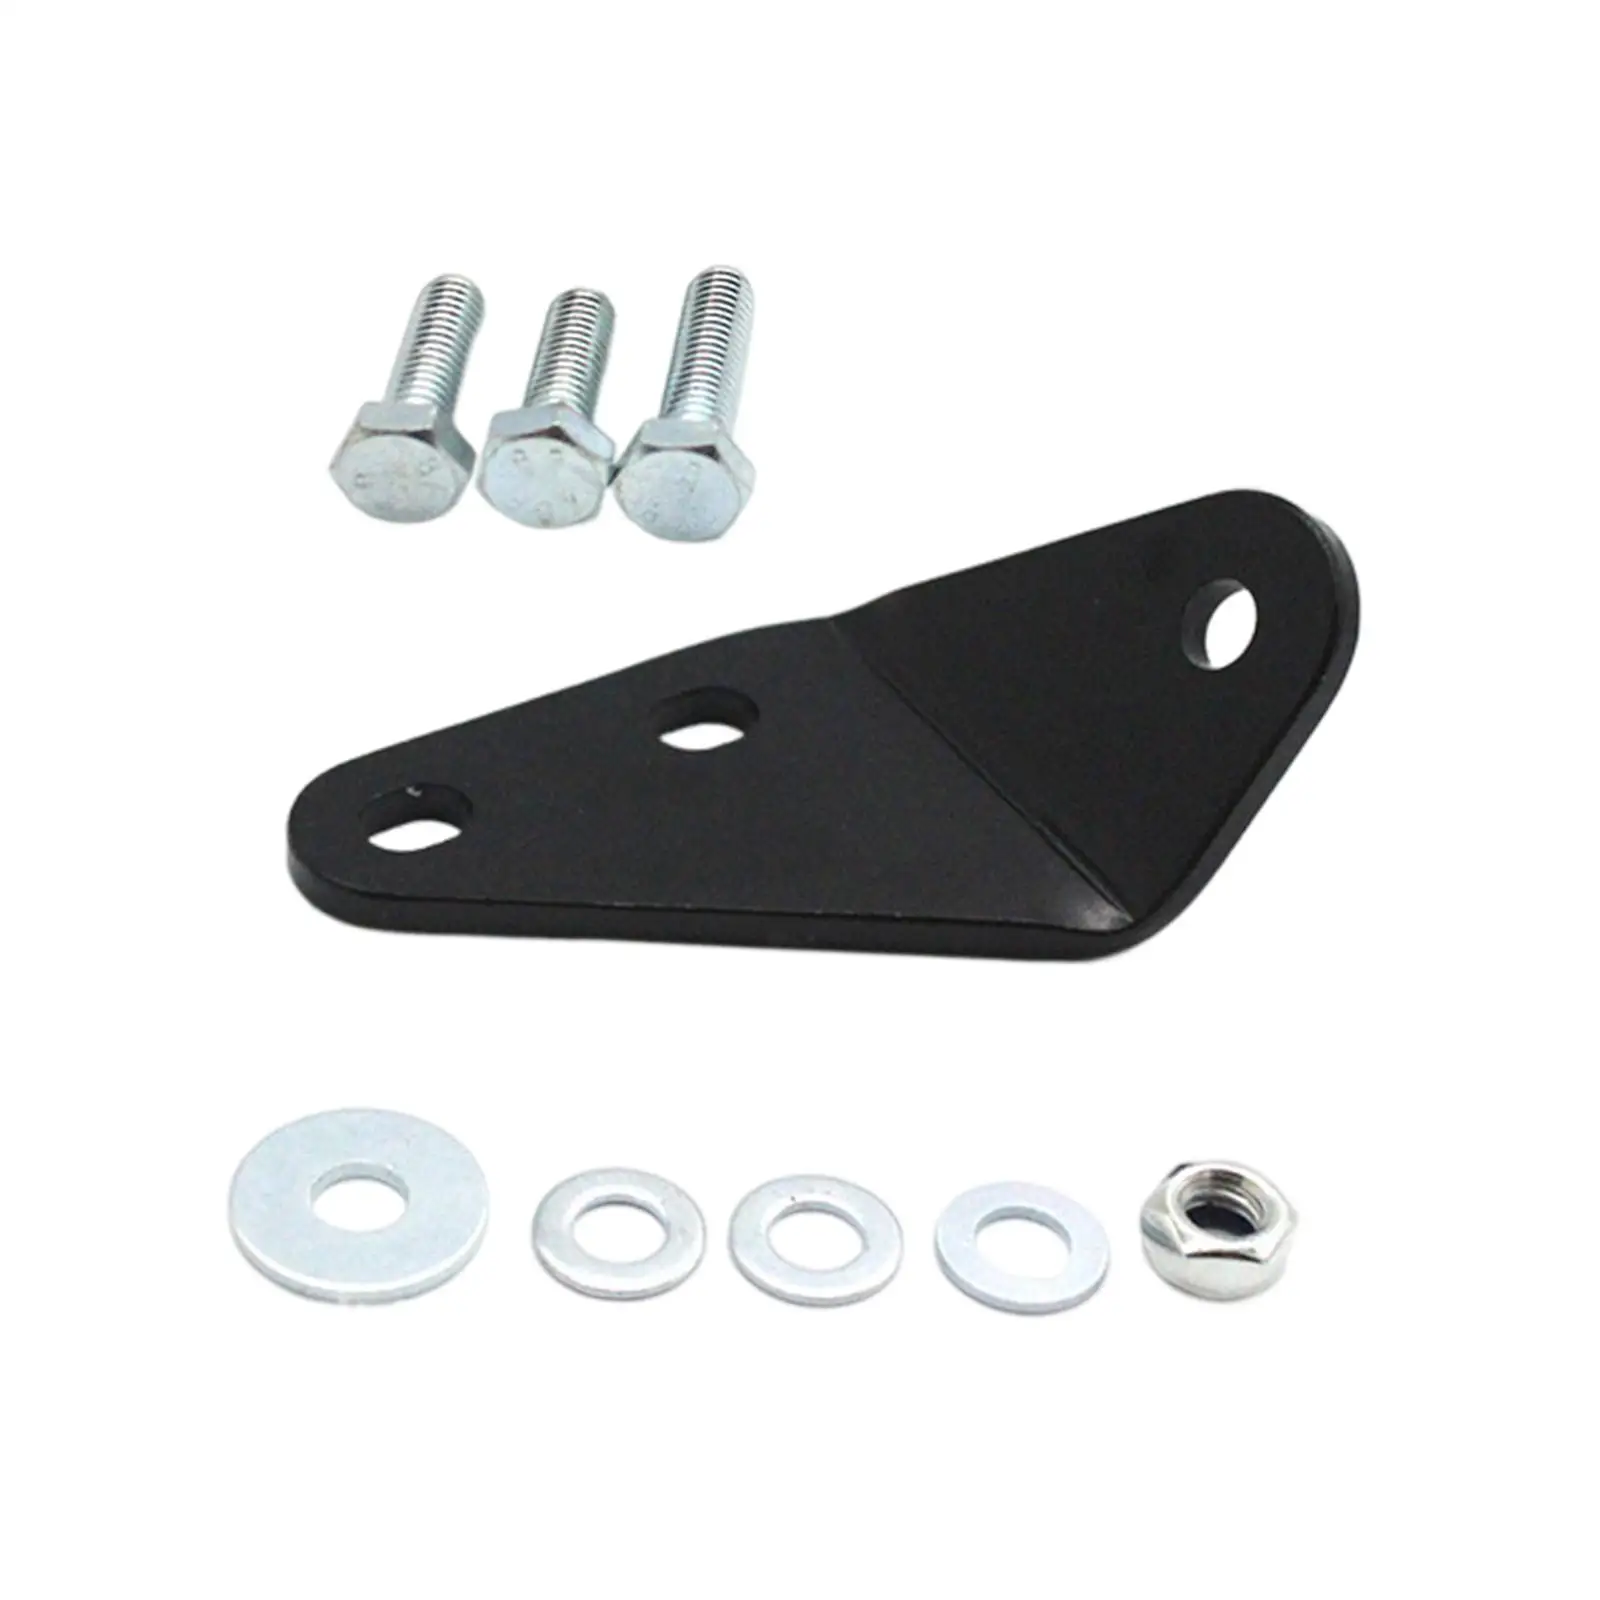 Clutch Pedal Repair Bracket Set High Quality Directly Replace for Volkswagen T4 Transporter Multivan Caravelle Accessories